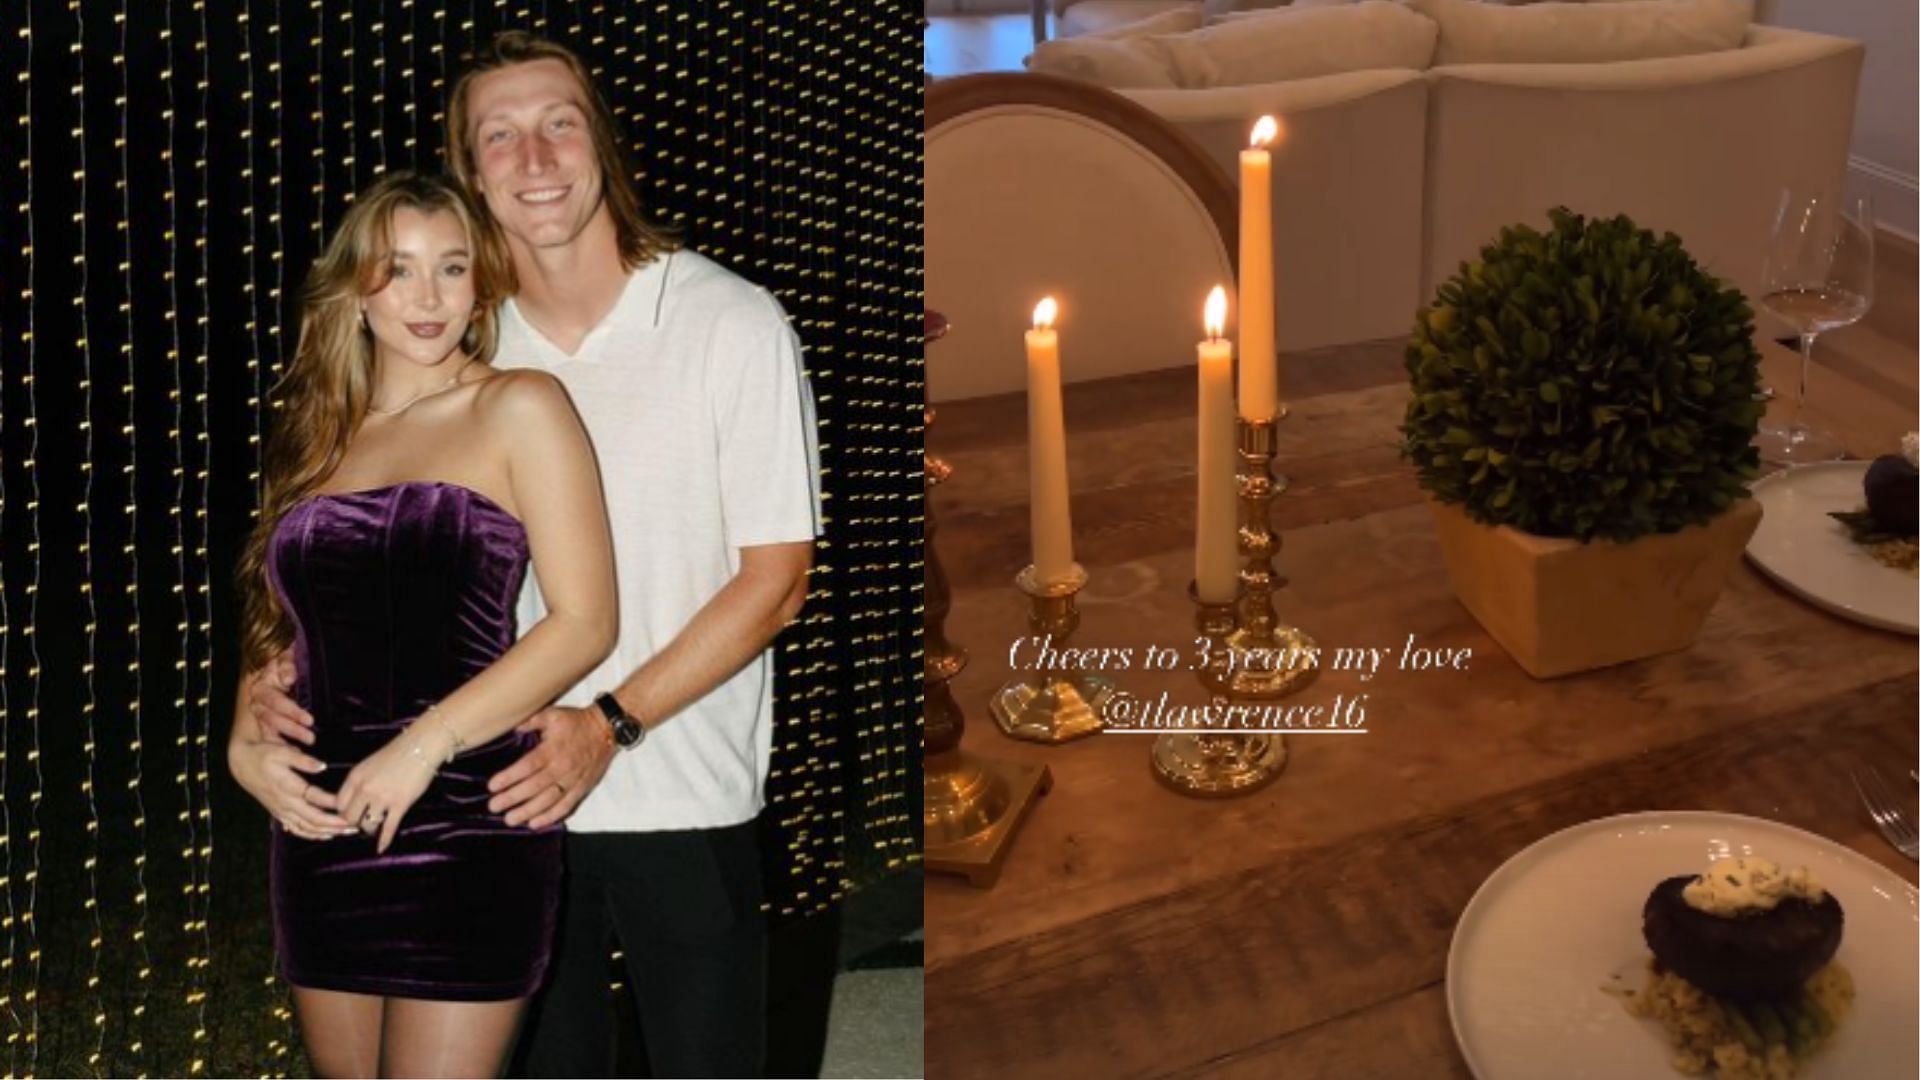 Marissa Lawrence planned a surprise date night at home for Trevor Lawrence ahead of their wedding anniversary.